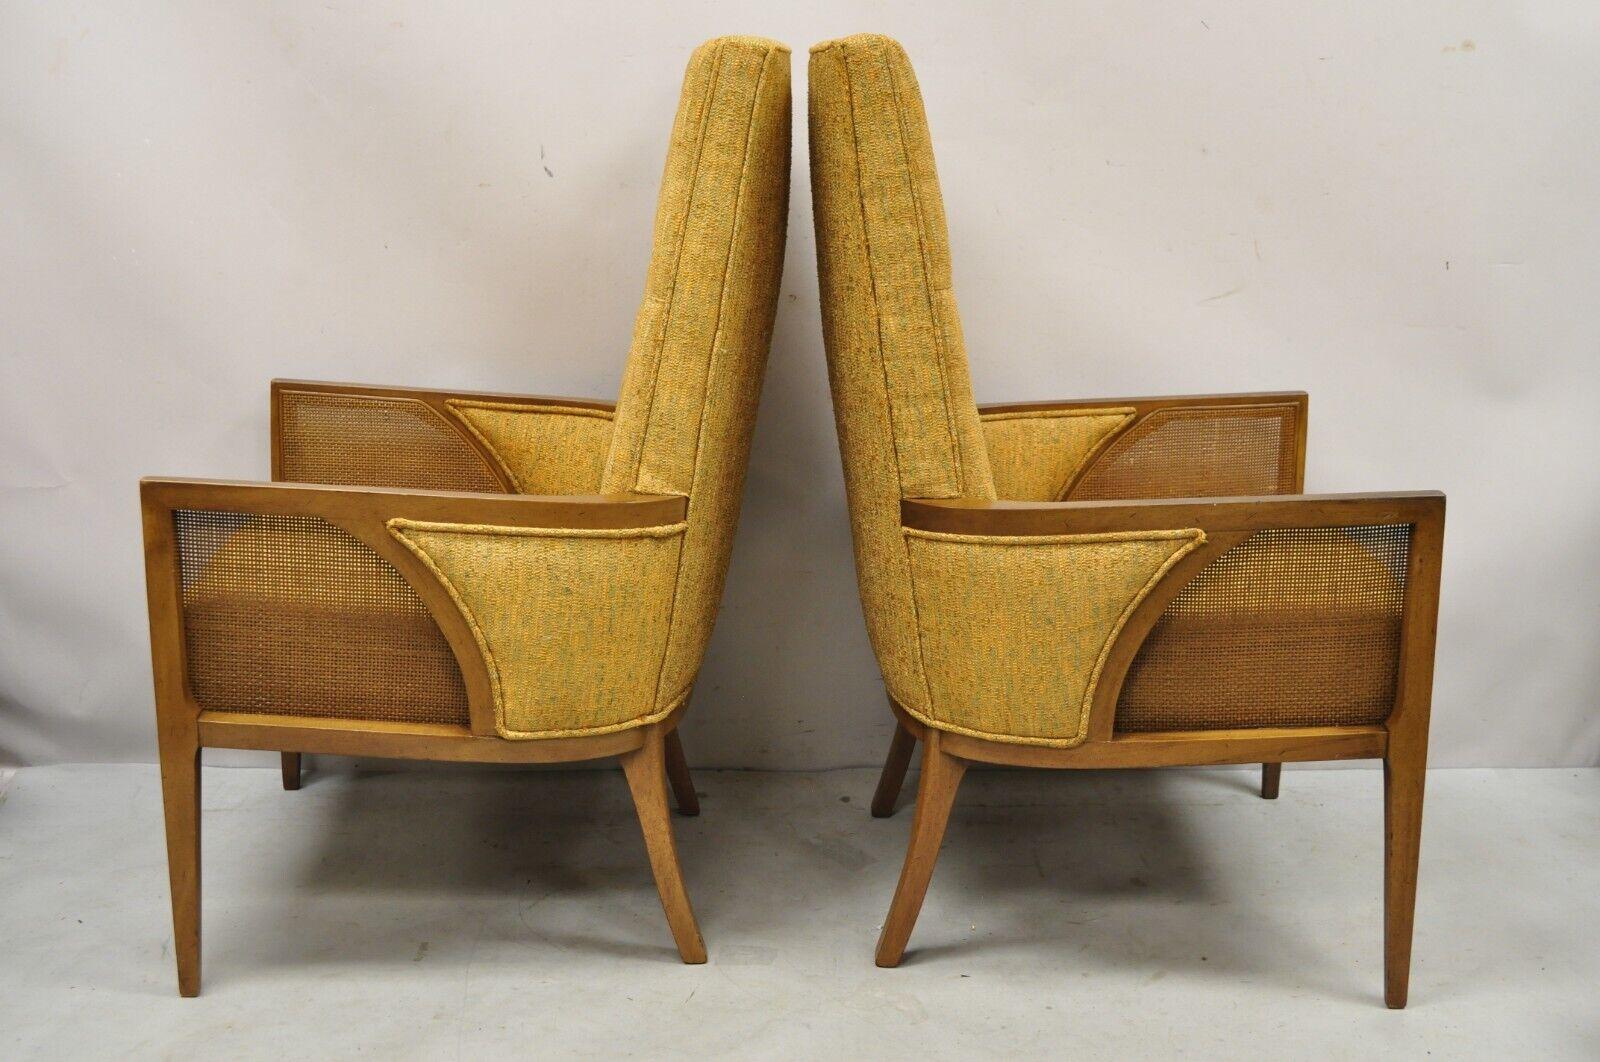 Caning Mid Century Hollywood Regency Sculpted Wood Cane Panel Lounge Chairs - a Pair For Sale